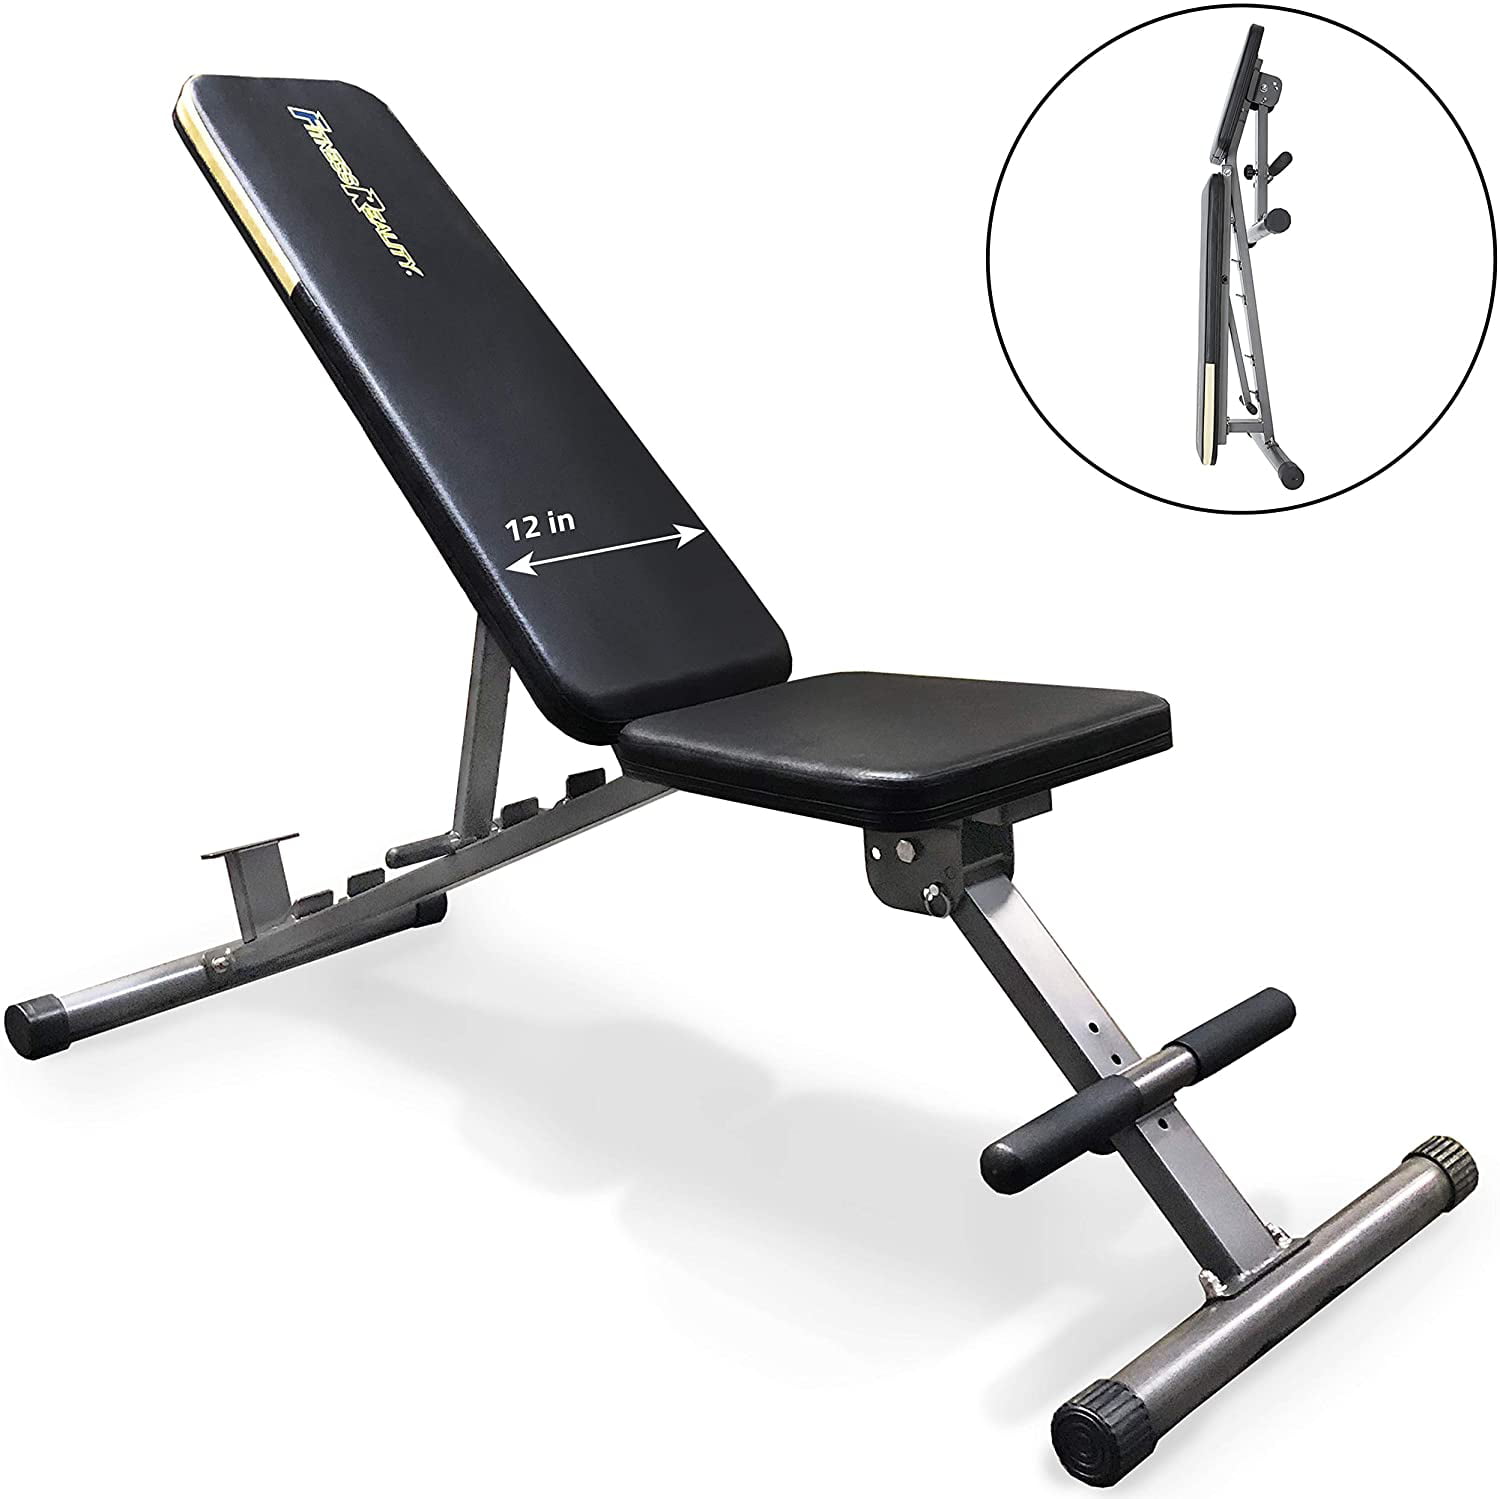 Fitness Reality 1000 Super Max Weight Bench with Upgraded Wider Backrest/Seat (2019 Version), 800 lb (2804) - Walmart.com - Walmart.com